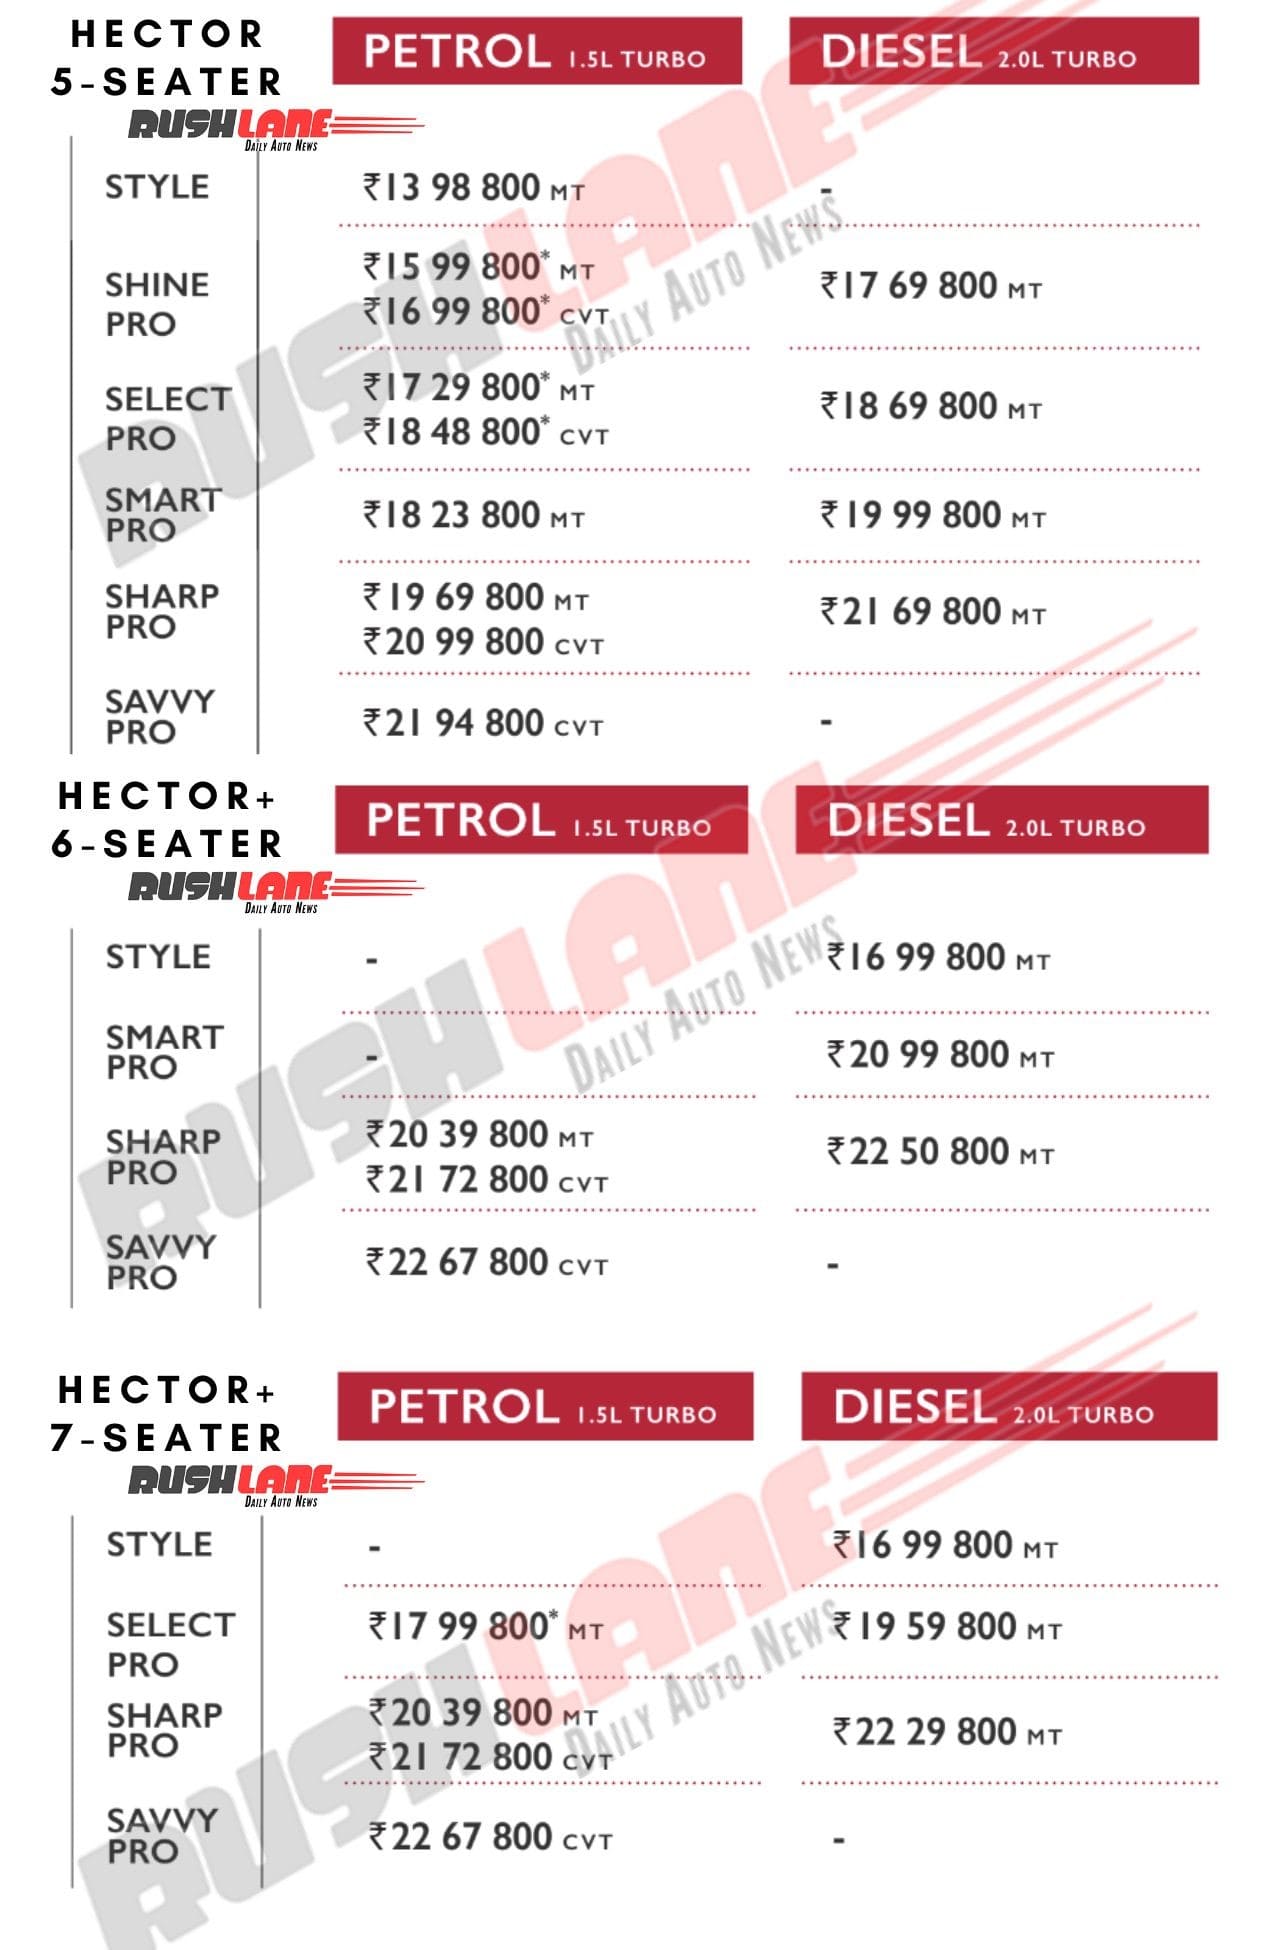 MG Hector Revised Prices